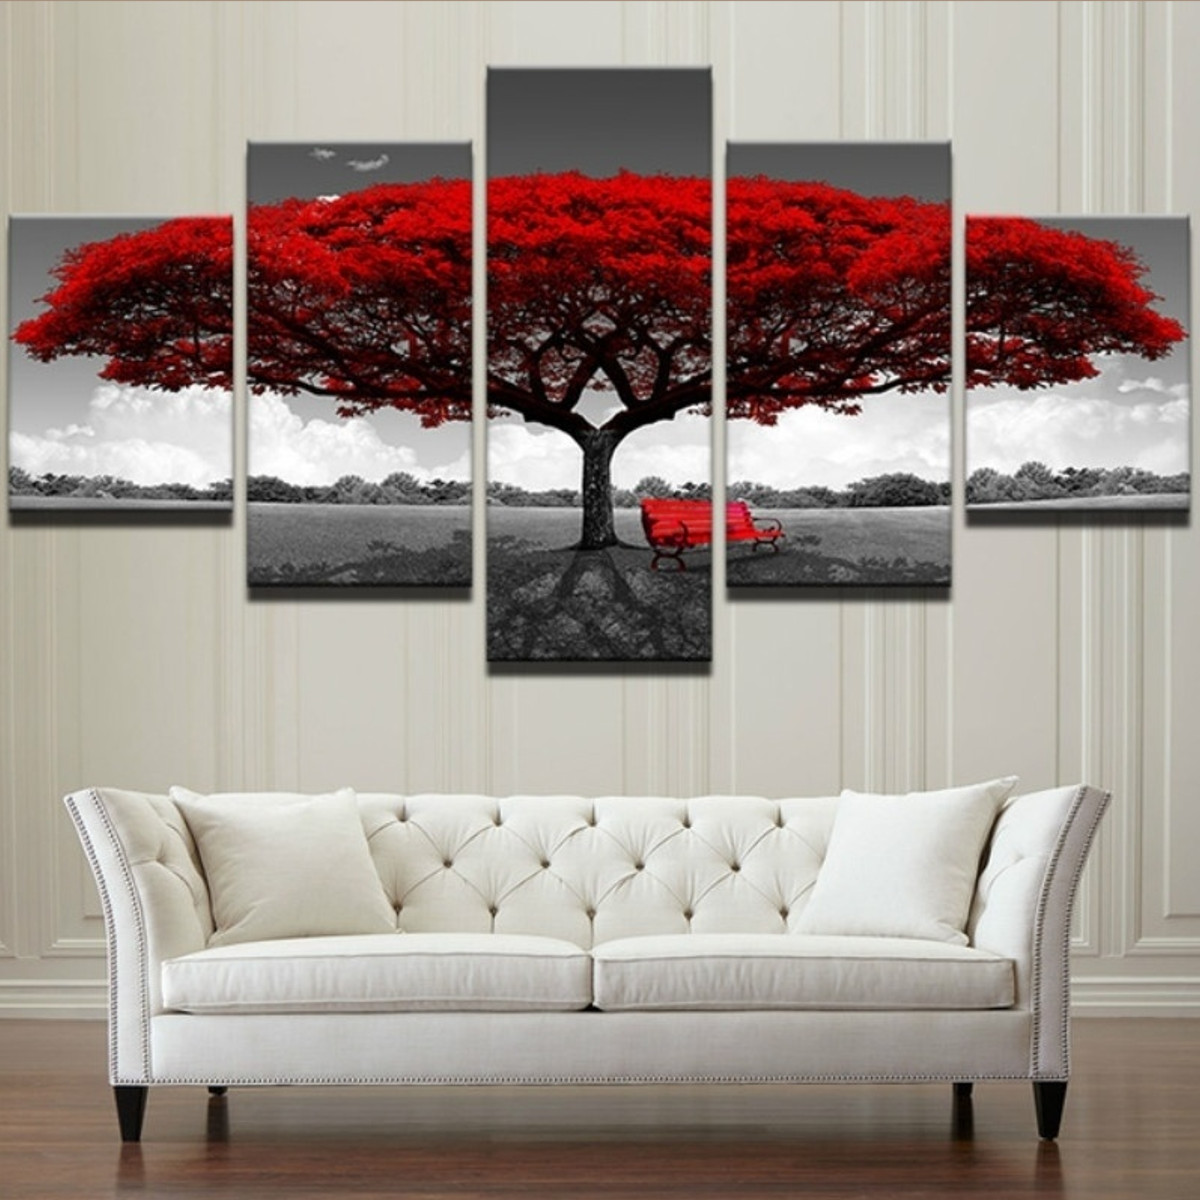 5Pcs-Red-Tree-Canvas-Paintings-Wall-Decorative-Print-Art-Pictures-Unframed-Wall-Hanging-Home-Office--1774551-7